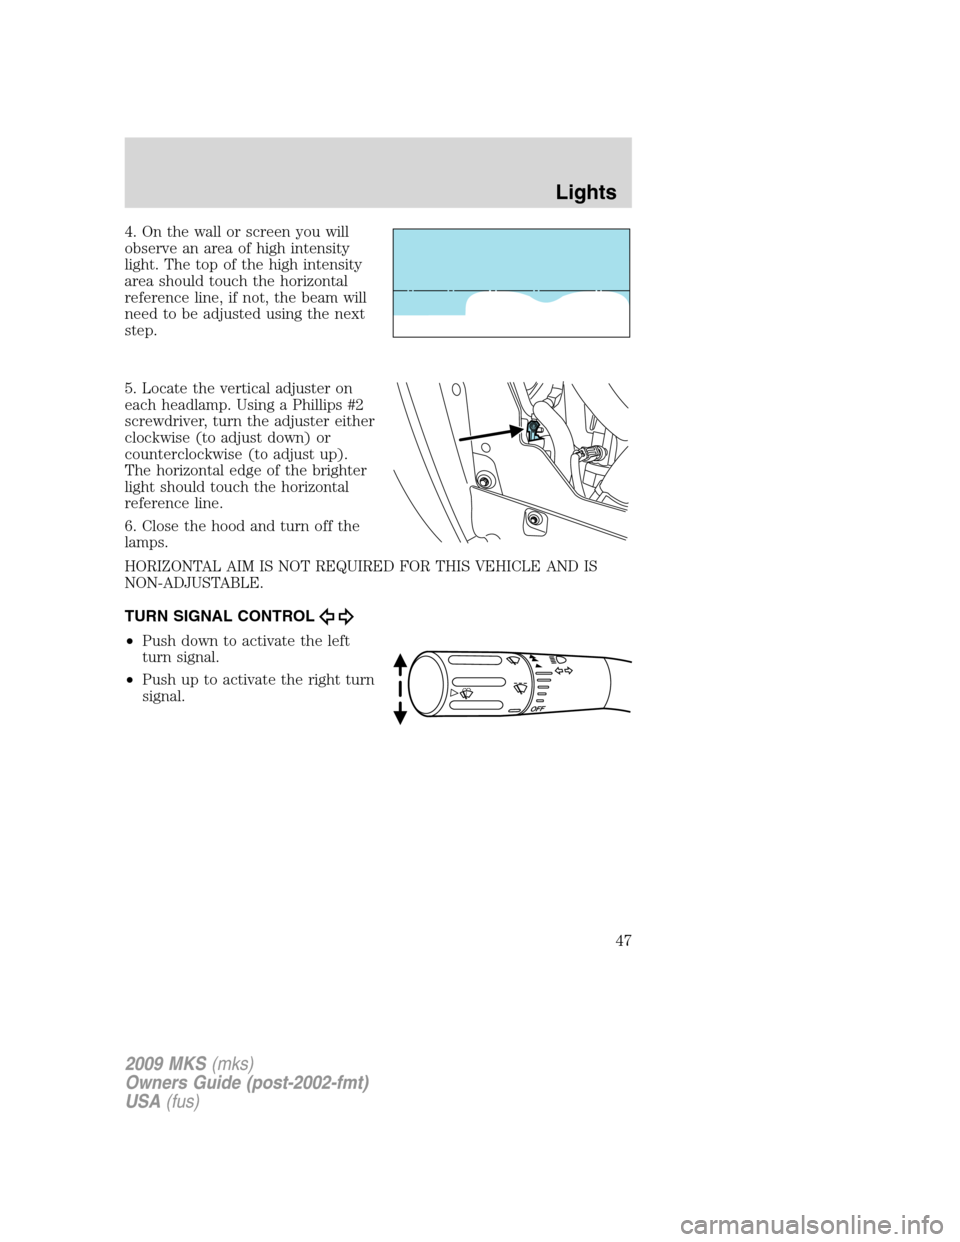 LINCOLN MKS 2009  Owners Manual 4. On the wall or screen you will
observe an area of high intensity
light. The top of the high intensity
area should touch the horizontal
reference line, if not, the beam will
need to be adjusted usin